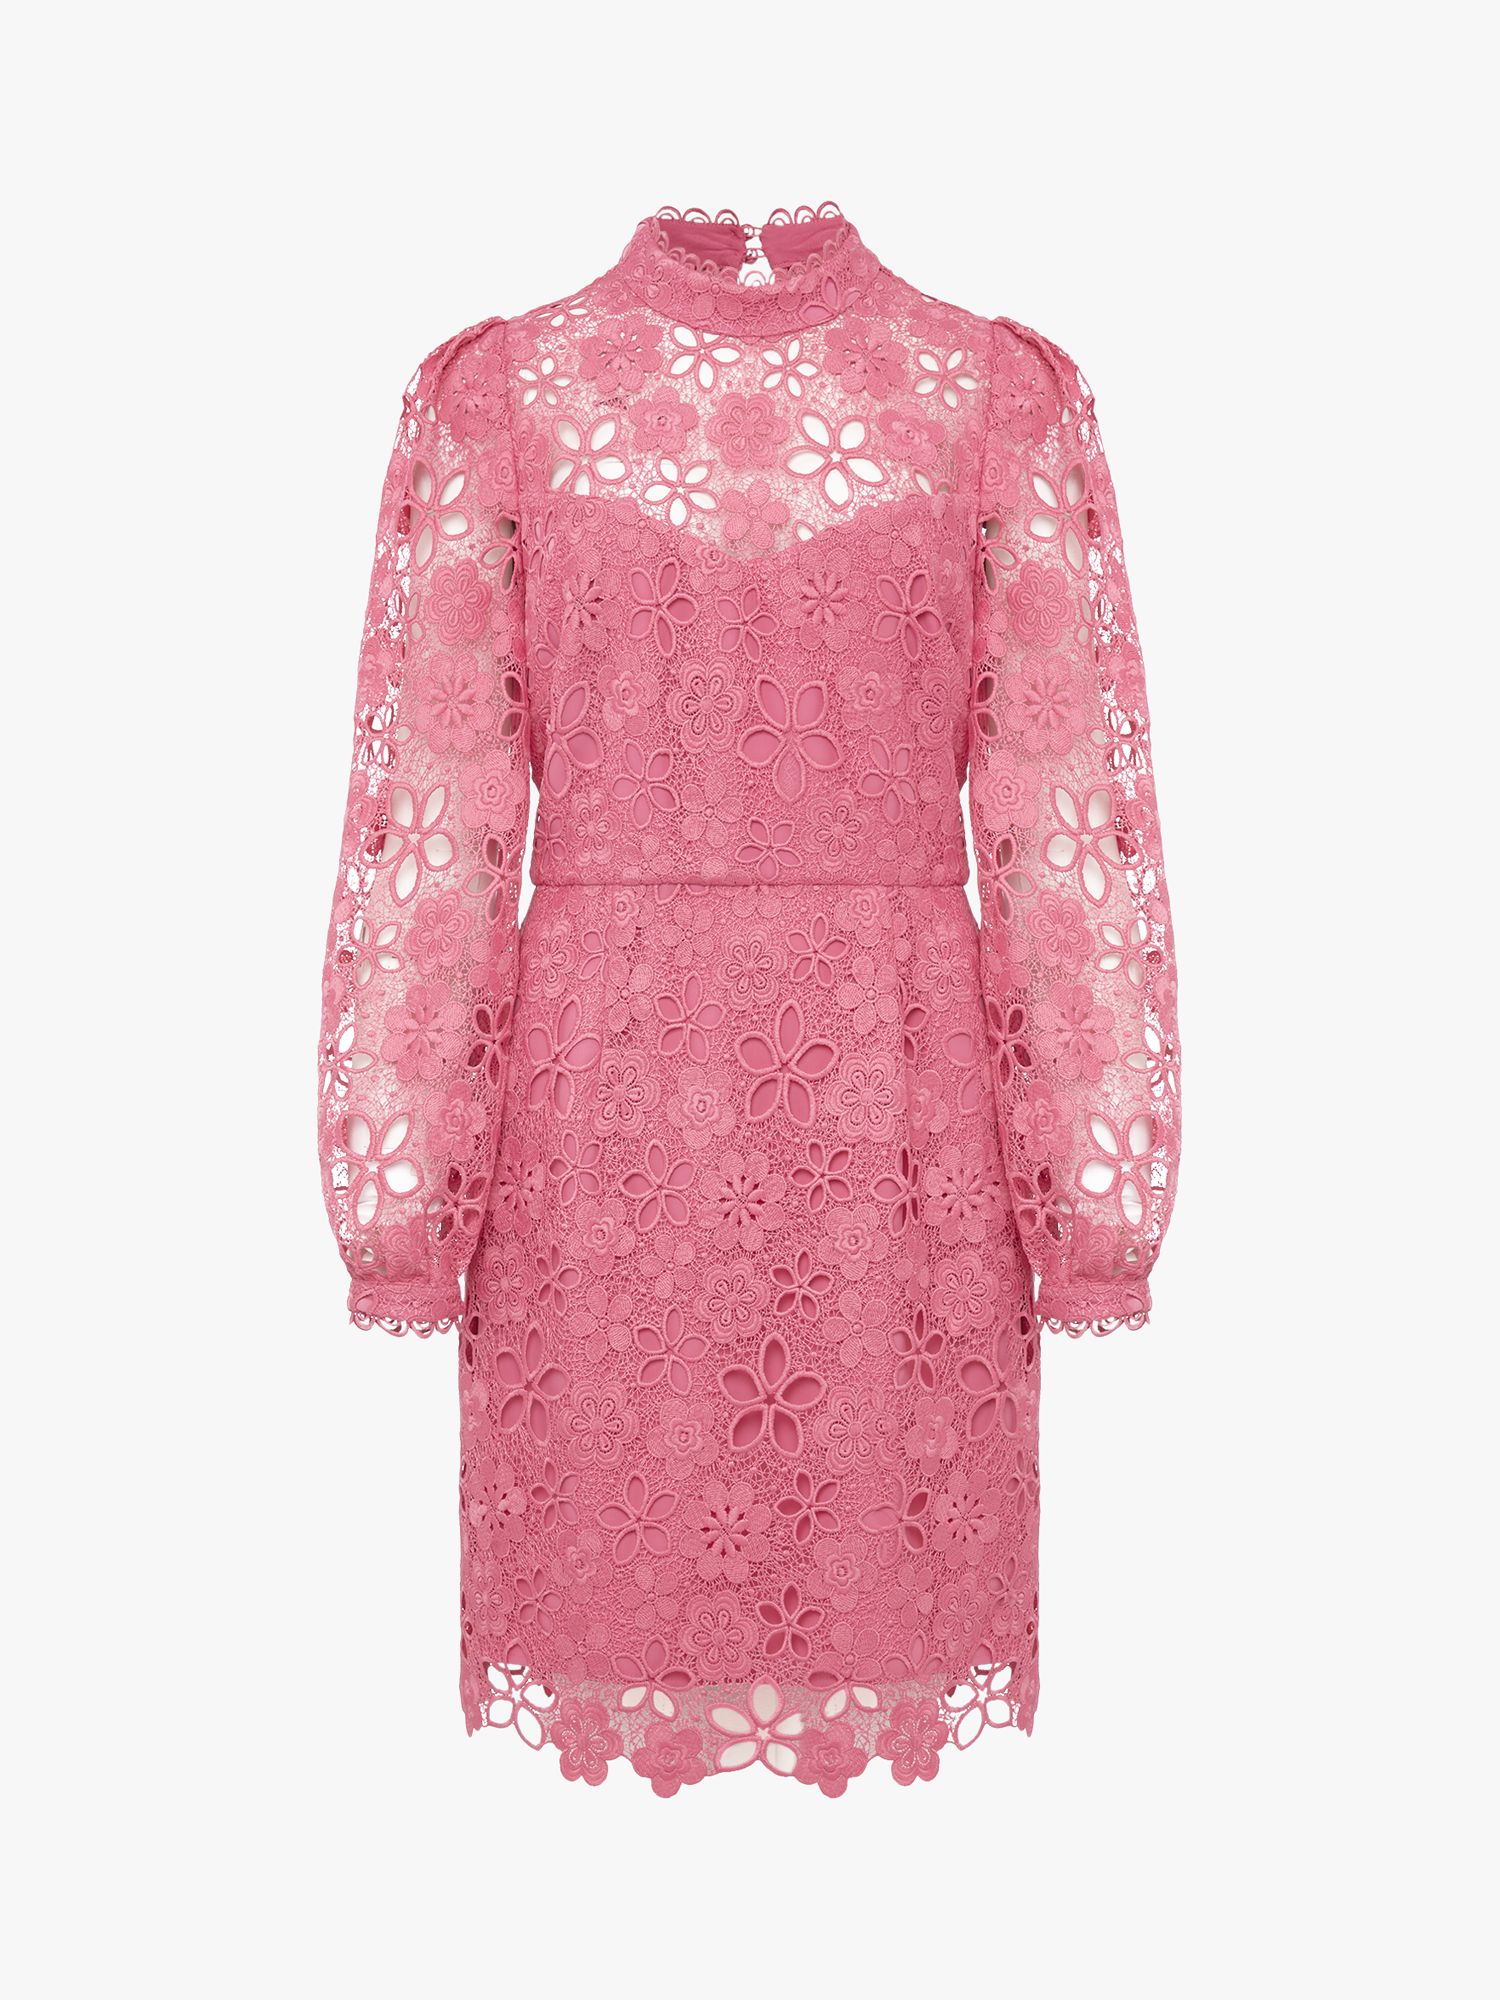 Phase Eight Doris Guipure Lace Dress, Candy Pink, 6